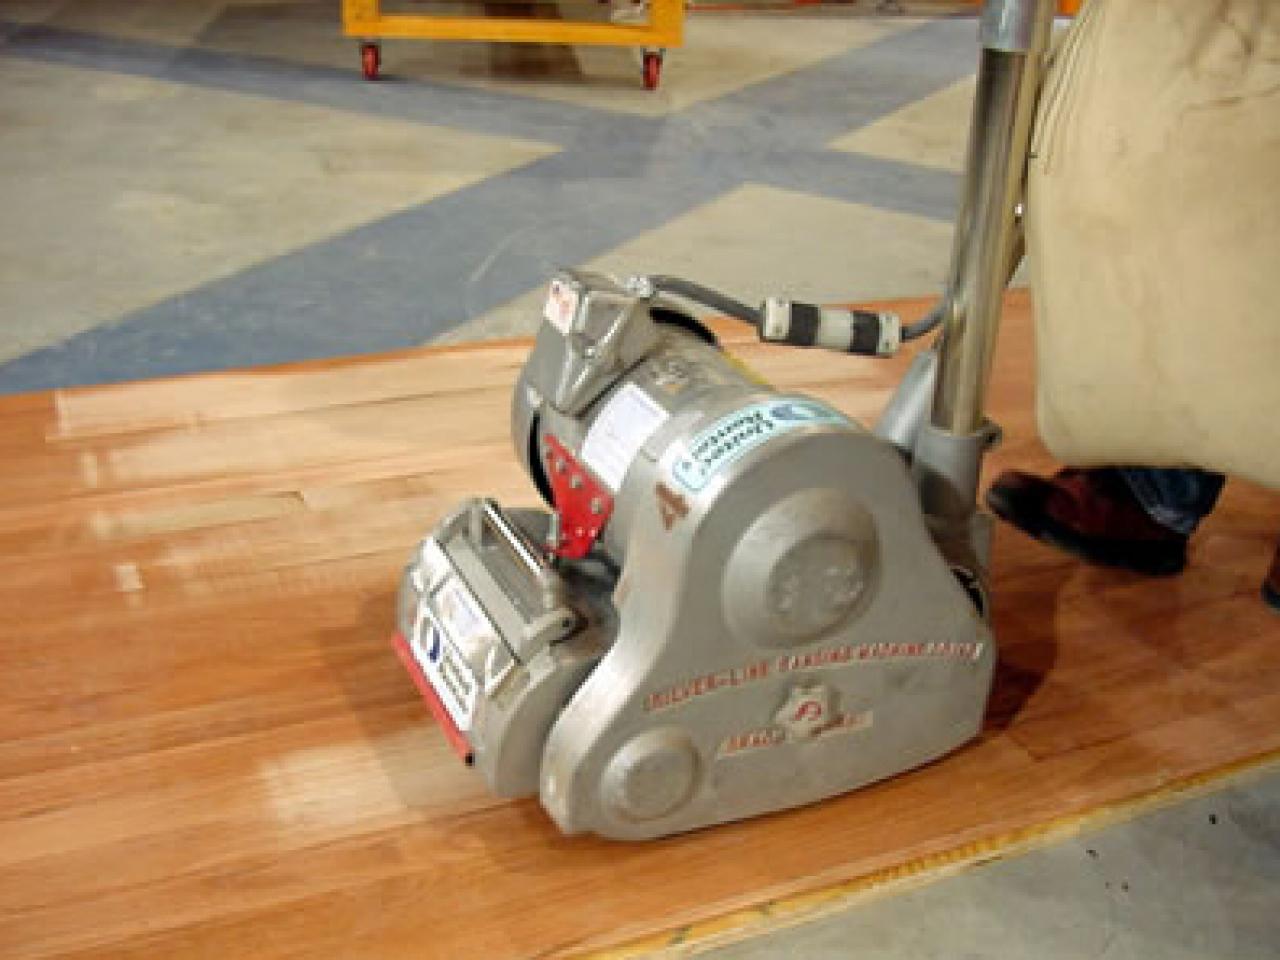 Drill Brushes And Floor Sander How To, What Type Of Sander To Use On Hardwood Floor